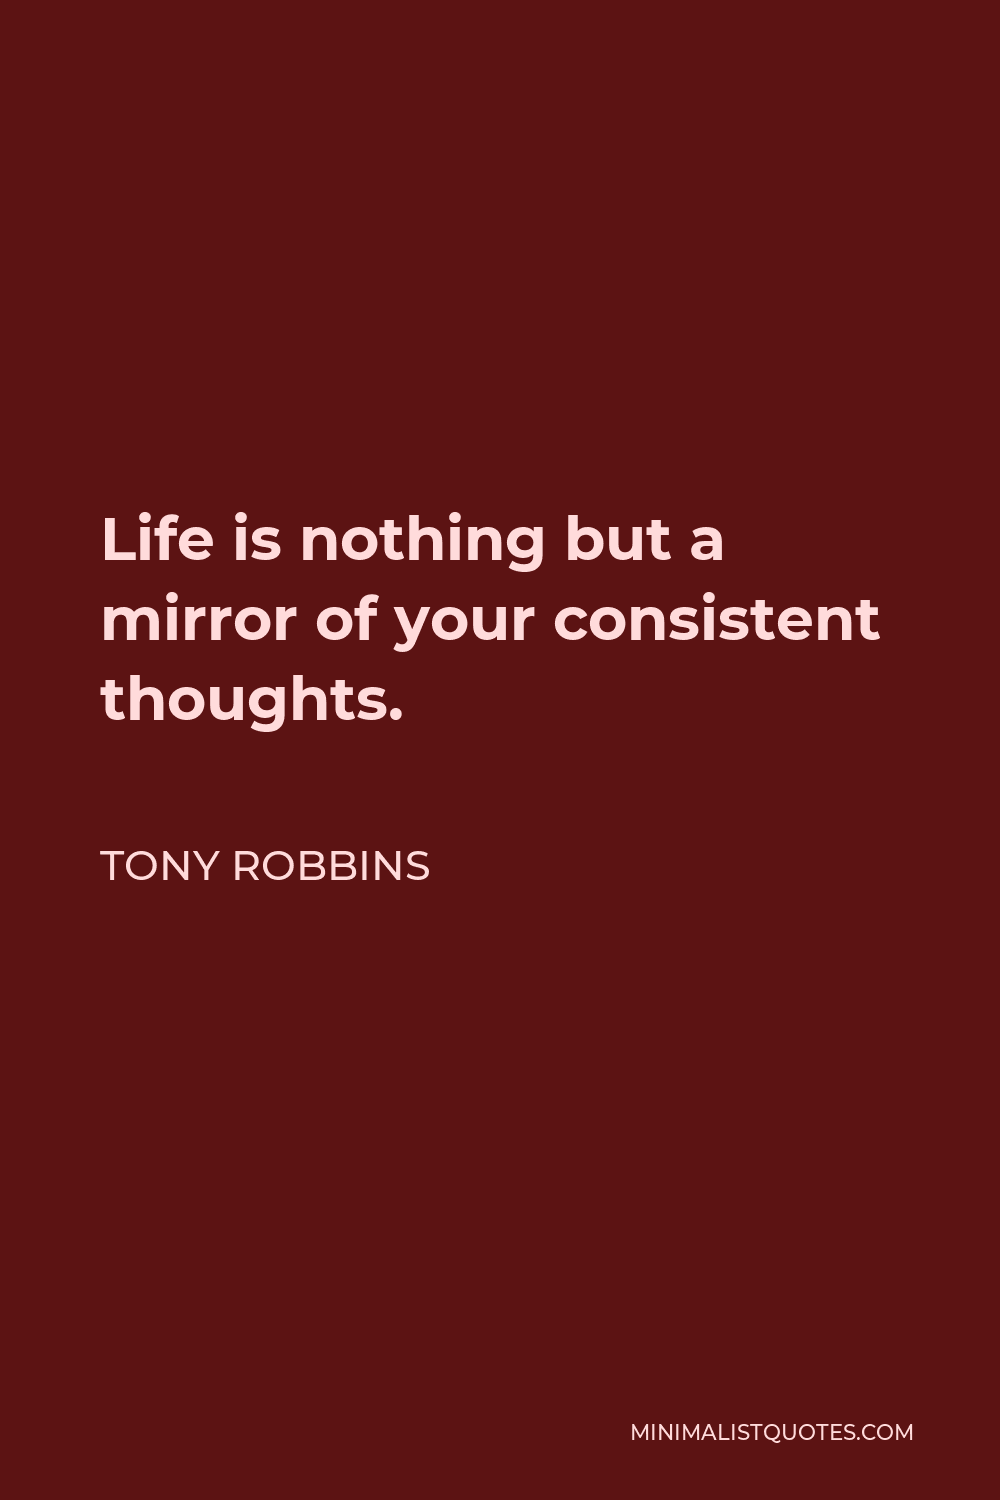 Tony Robbins Quote - Life is nothing but a mirror of your consistent thoughts.